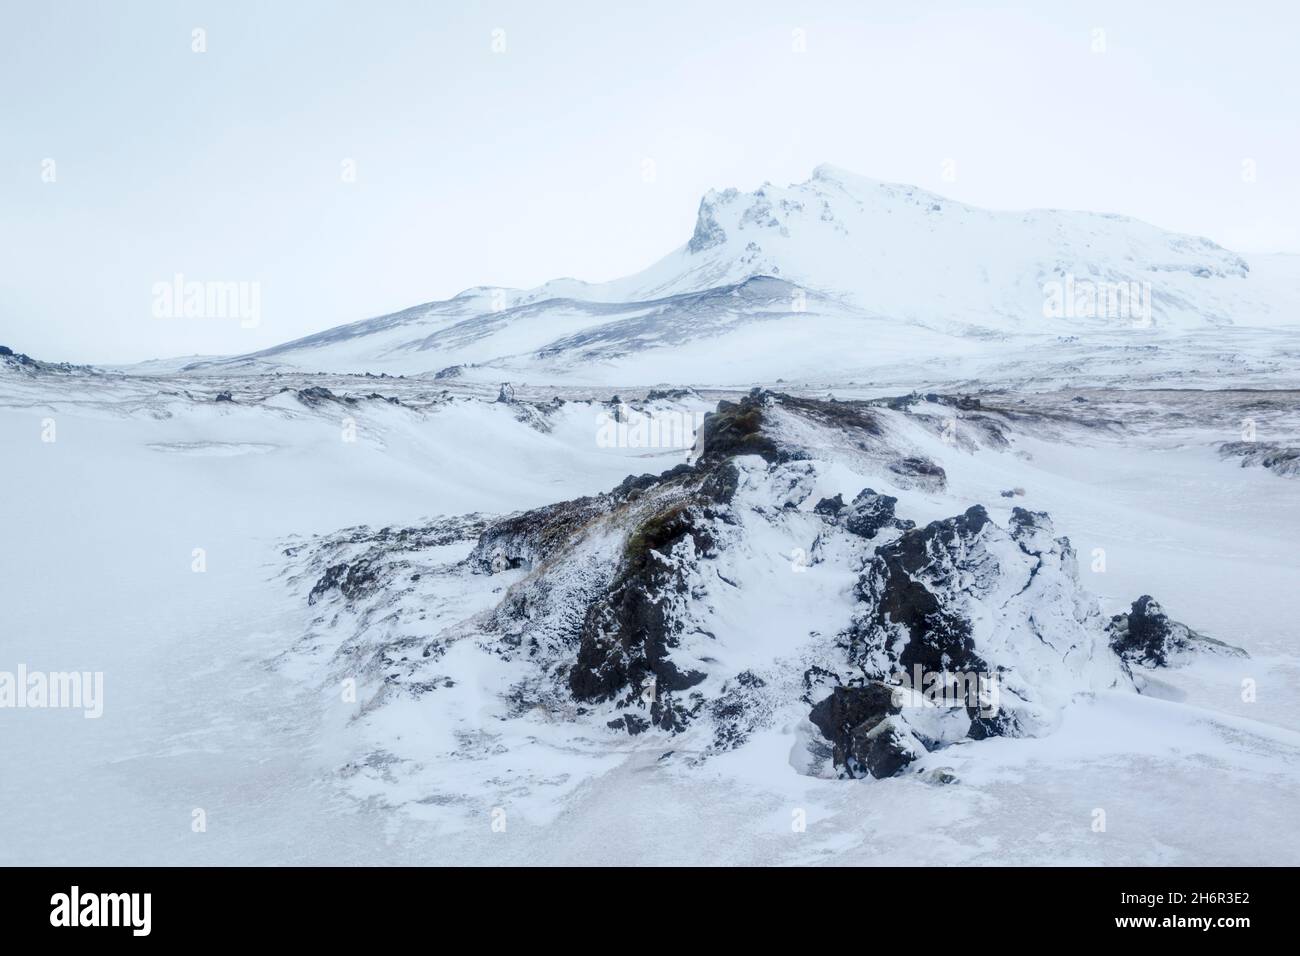 Winter view towards the mountain of Hreggnasi on the Snæfellsnesnes peninsula in the Western part of Iceland Stock Photo